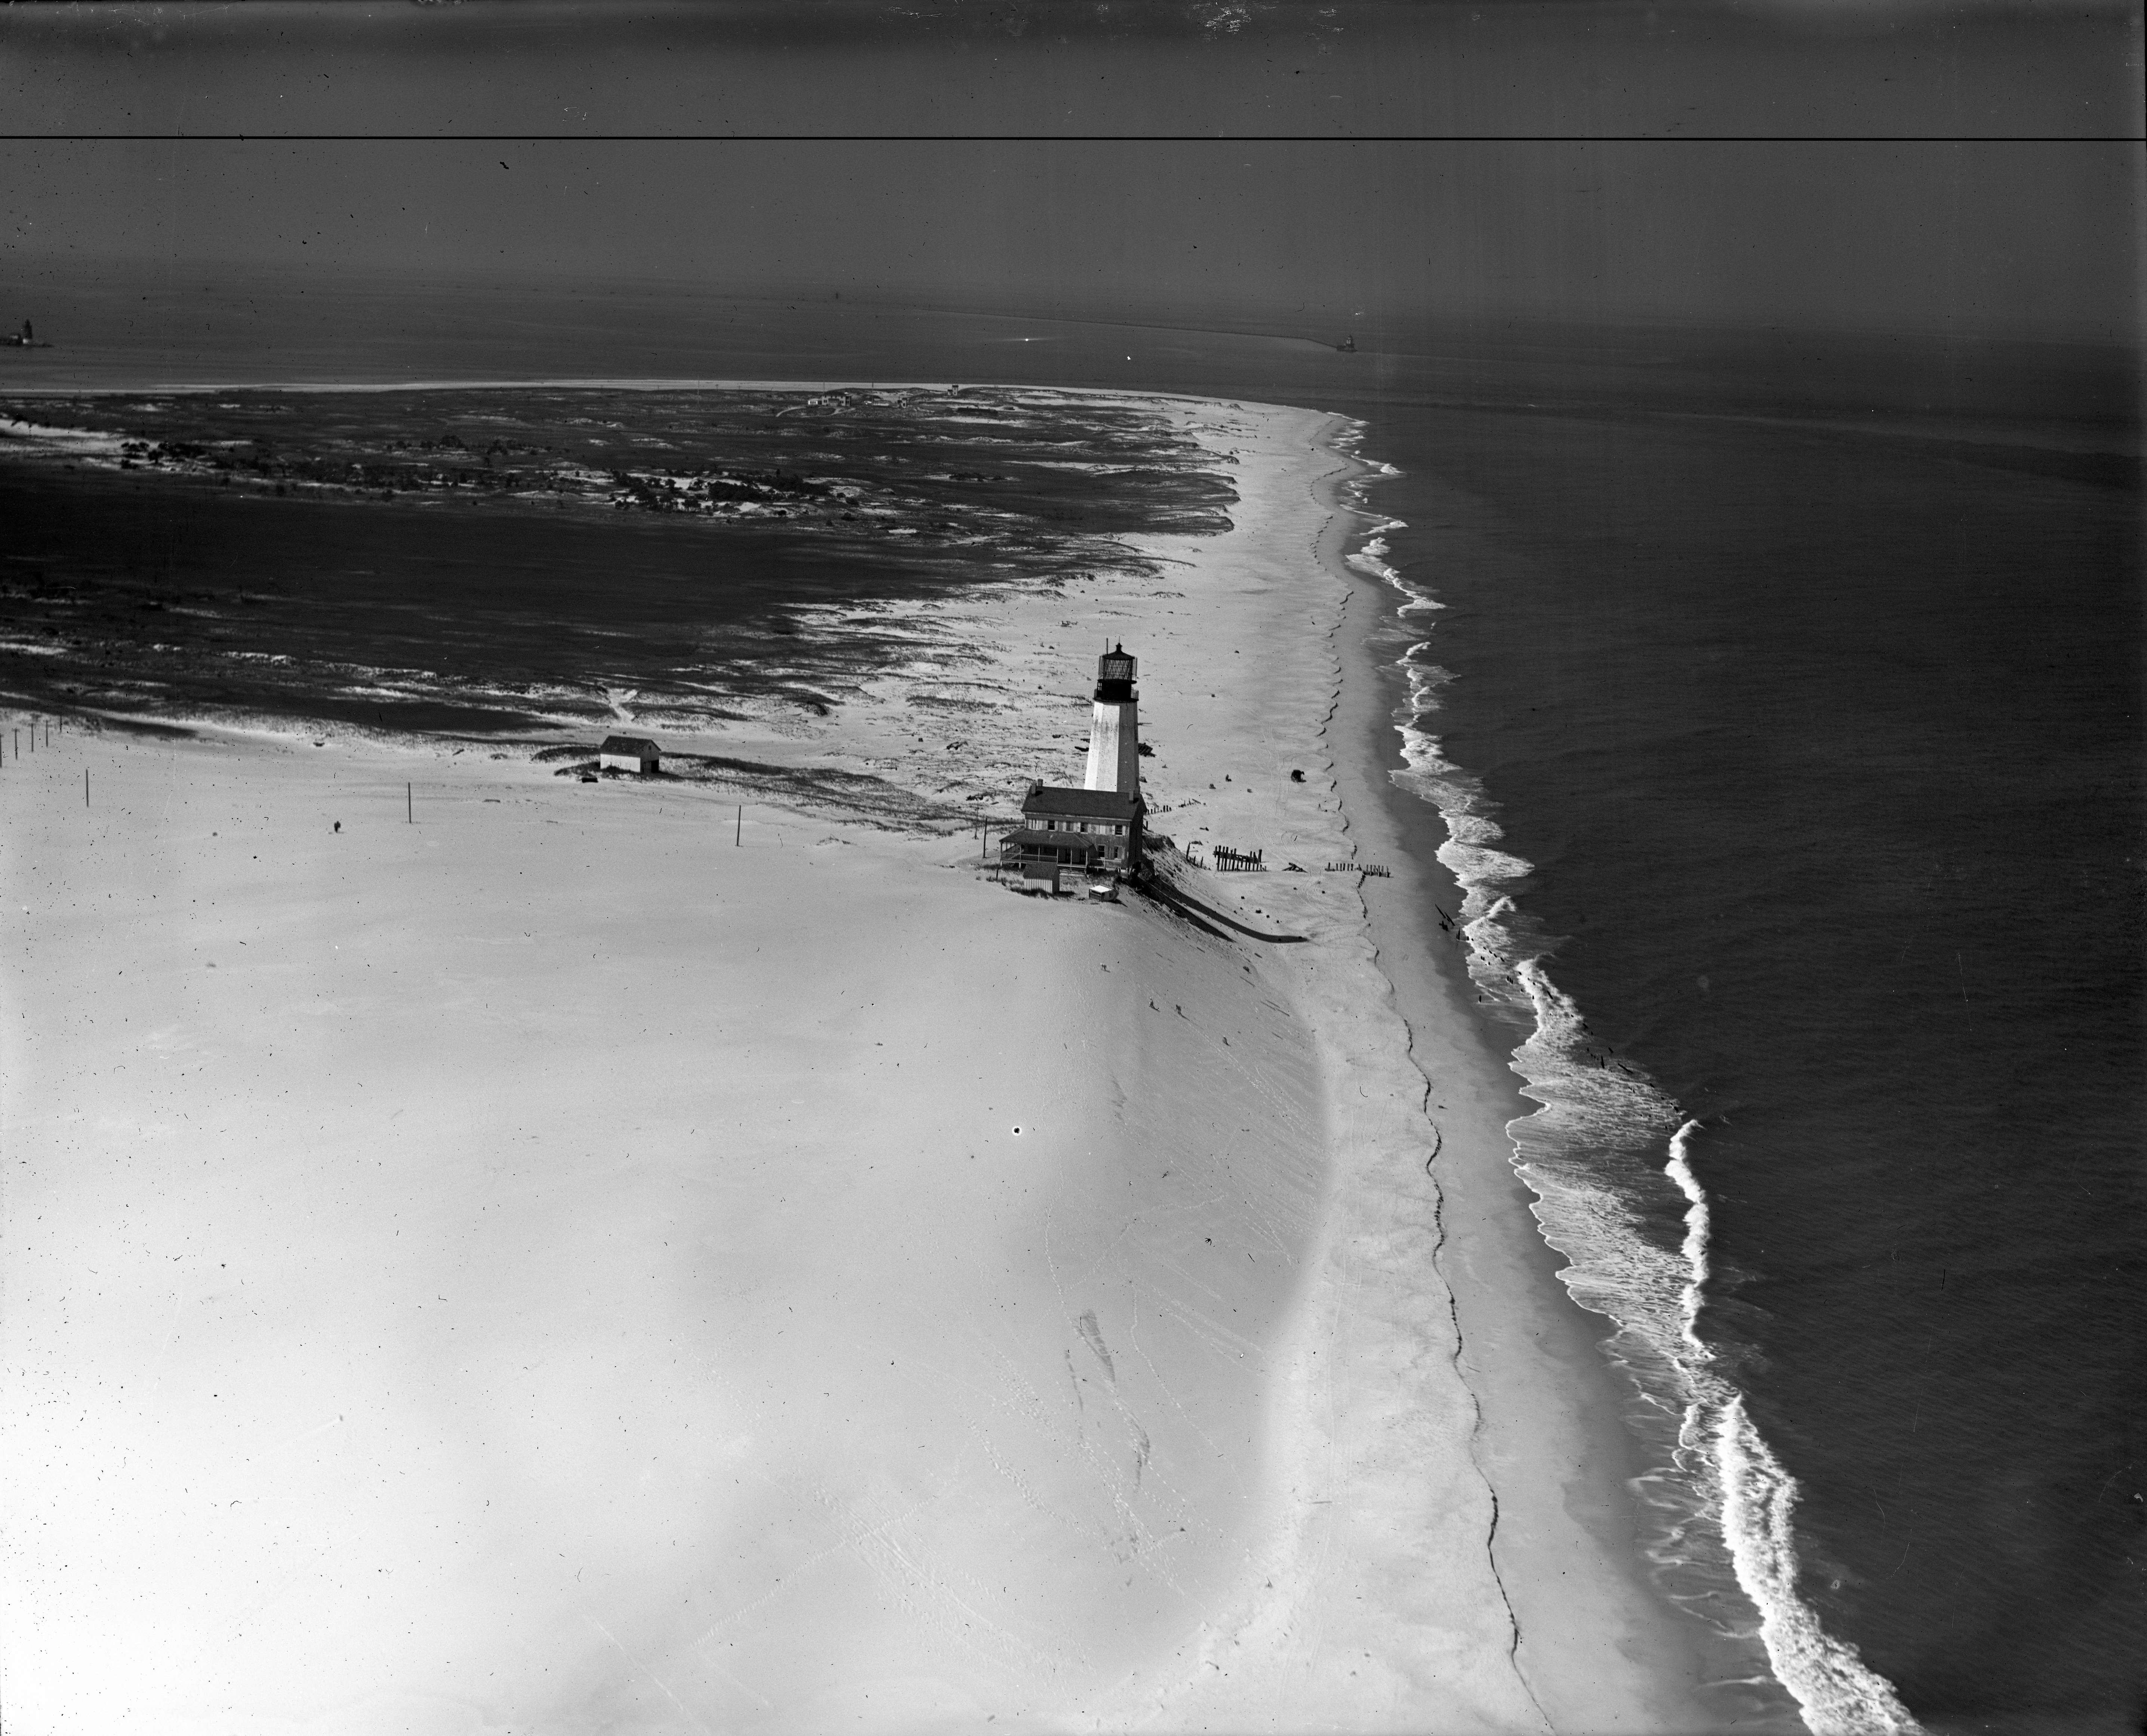 Black and white aerial photograph of the Cape Henlopen Lighthouse and surrounding landscape.